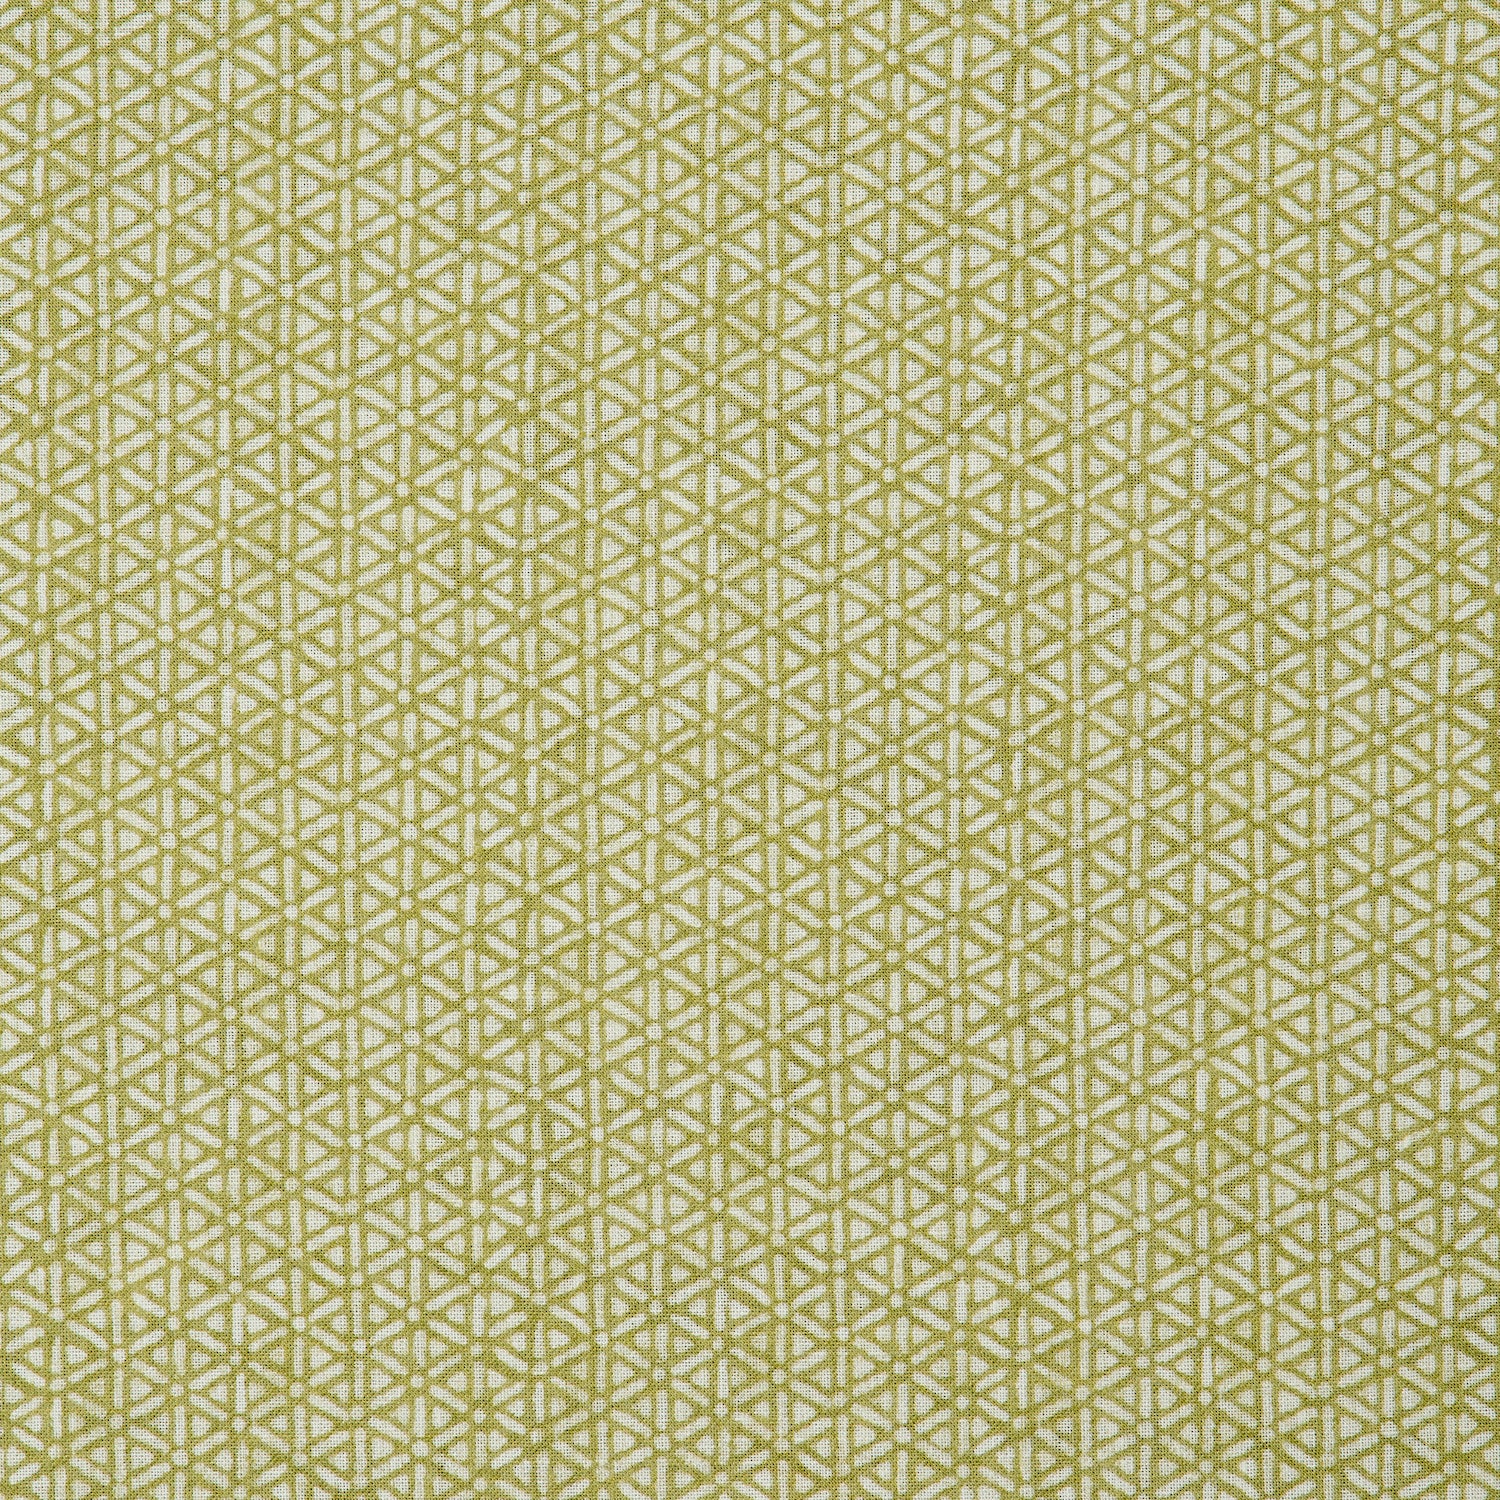 Detail of a linen fabric in a detailed geometric pattern in white on a chartreuse field.